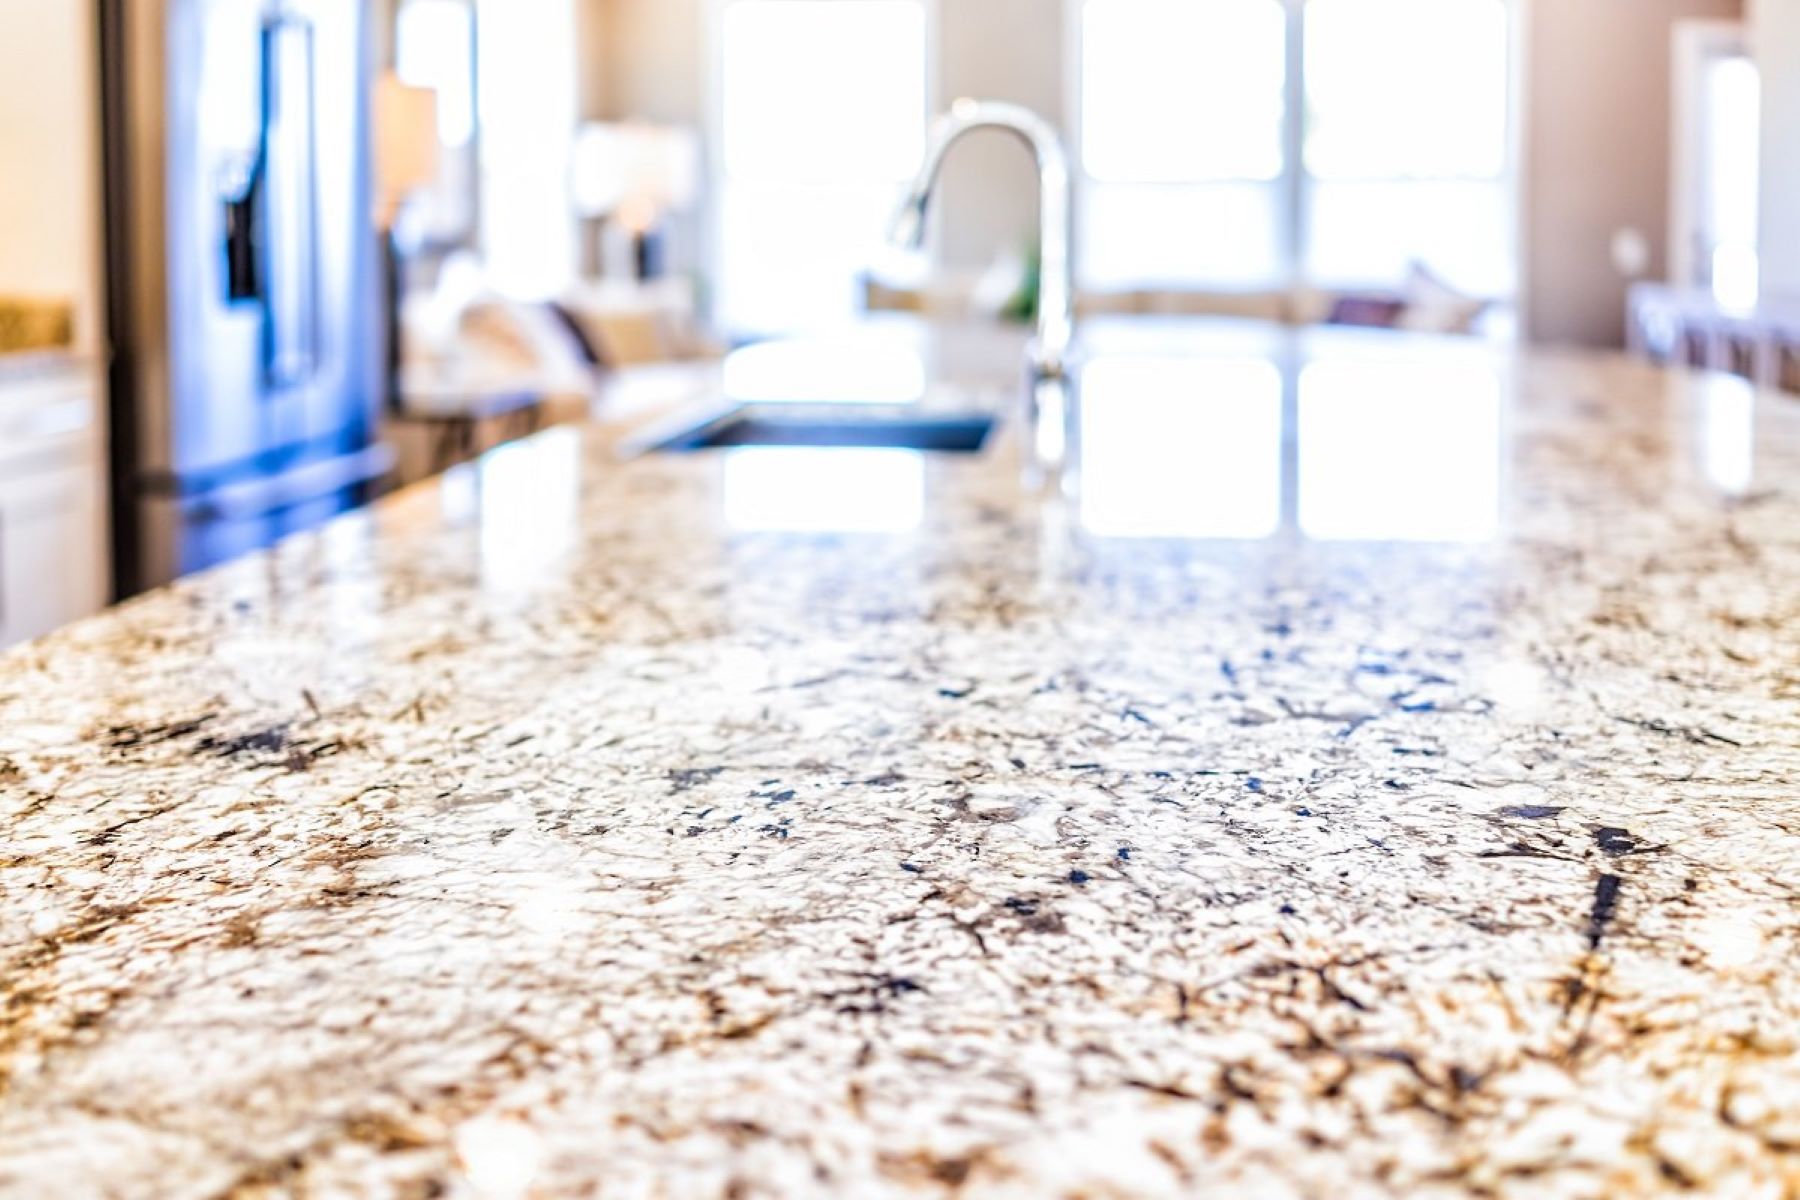 How To Get Rid Of Gritty Feeling On Granite Countertops